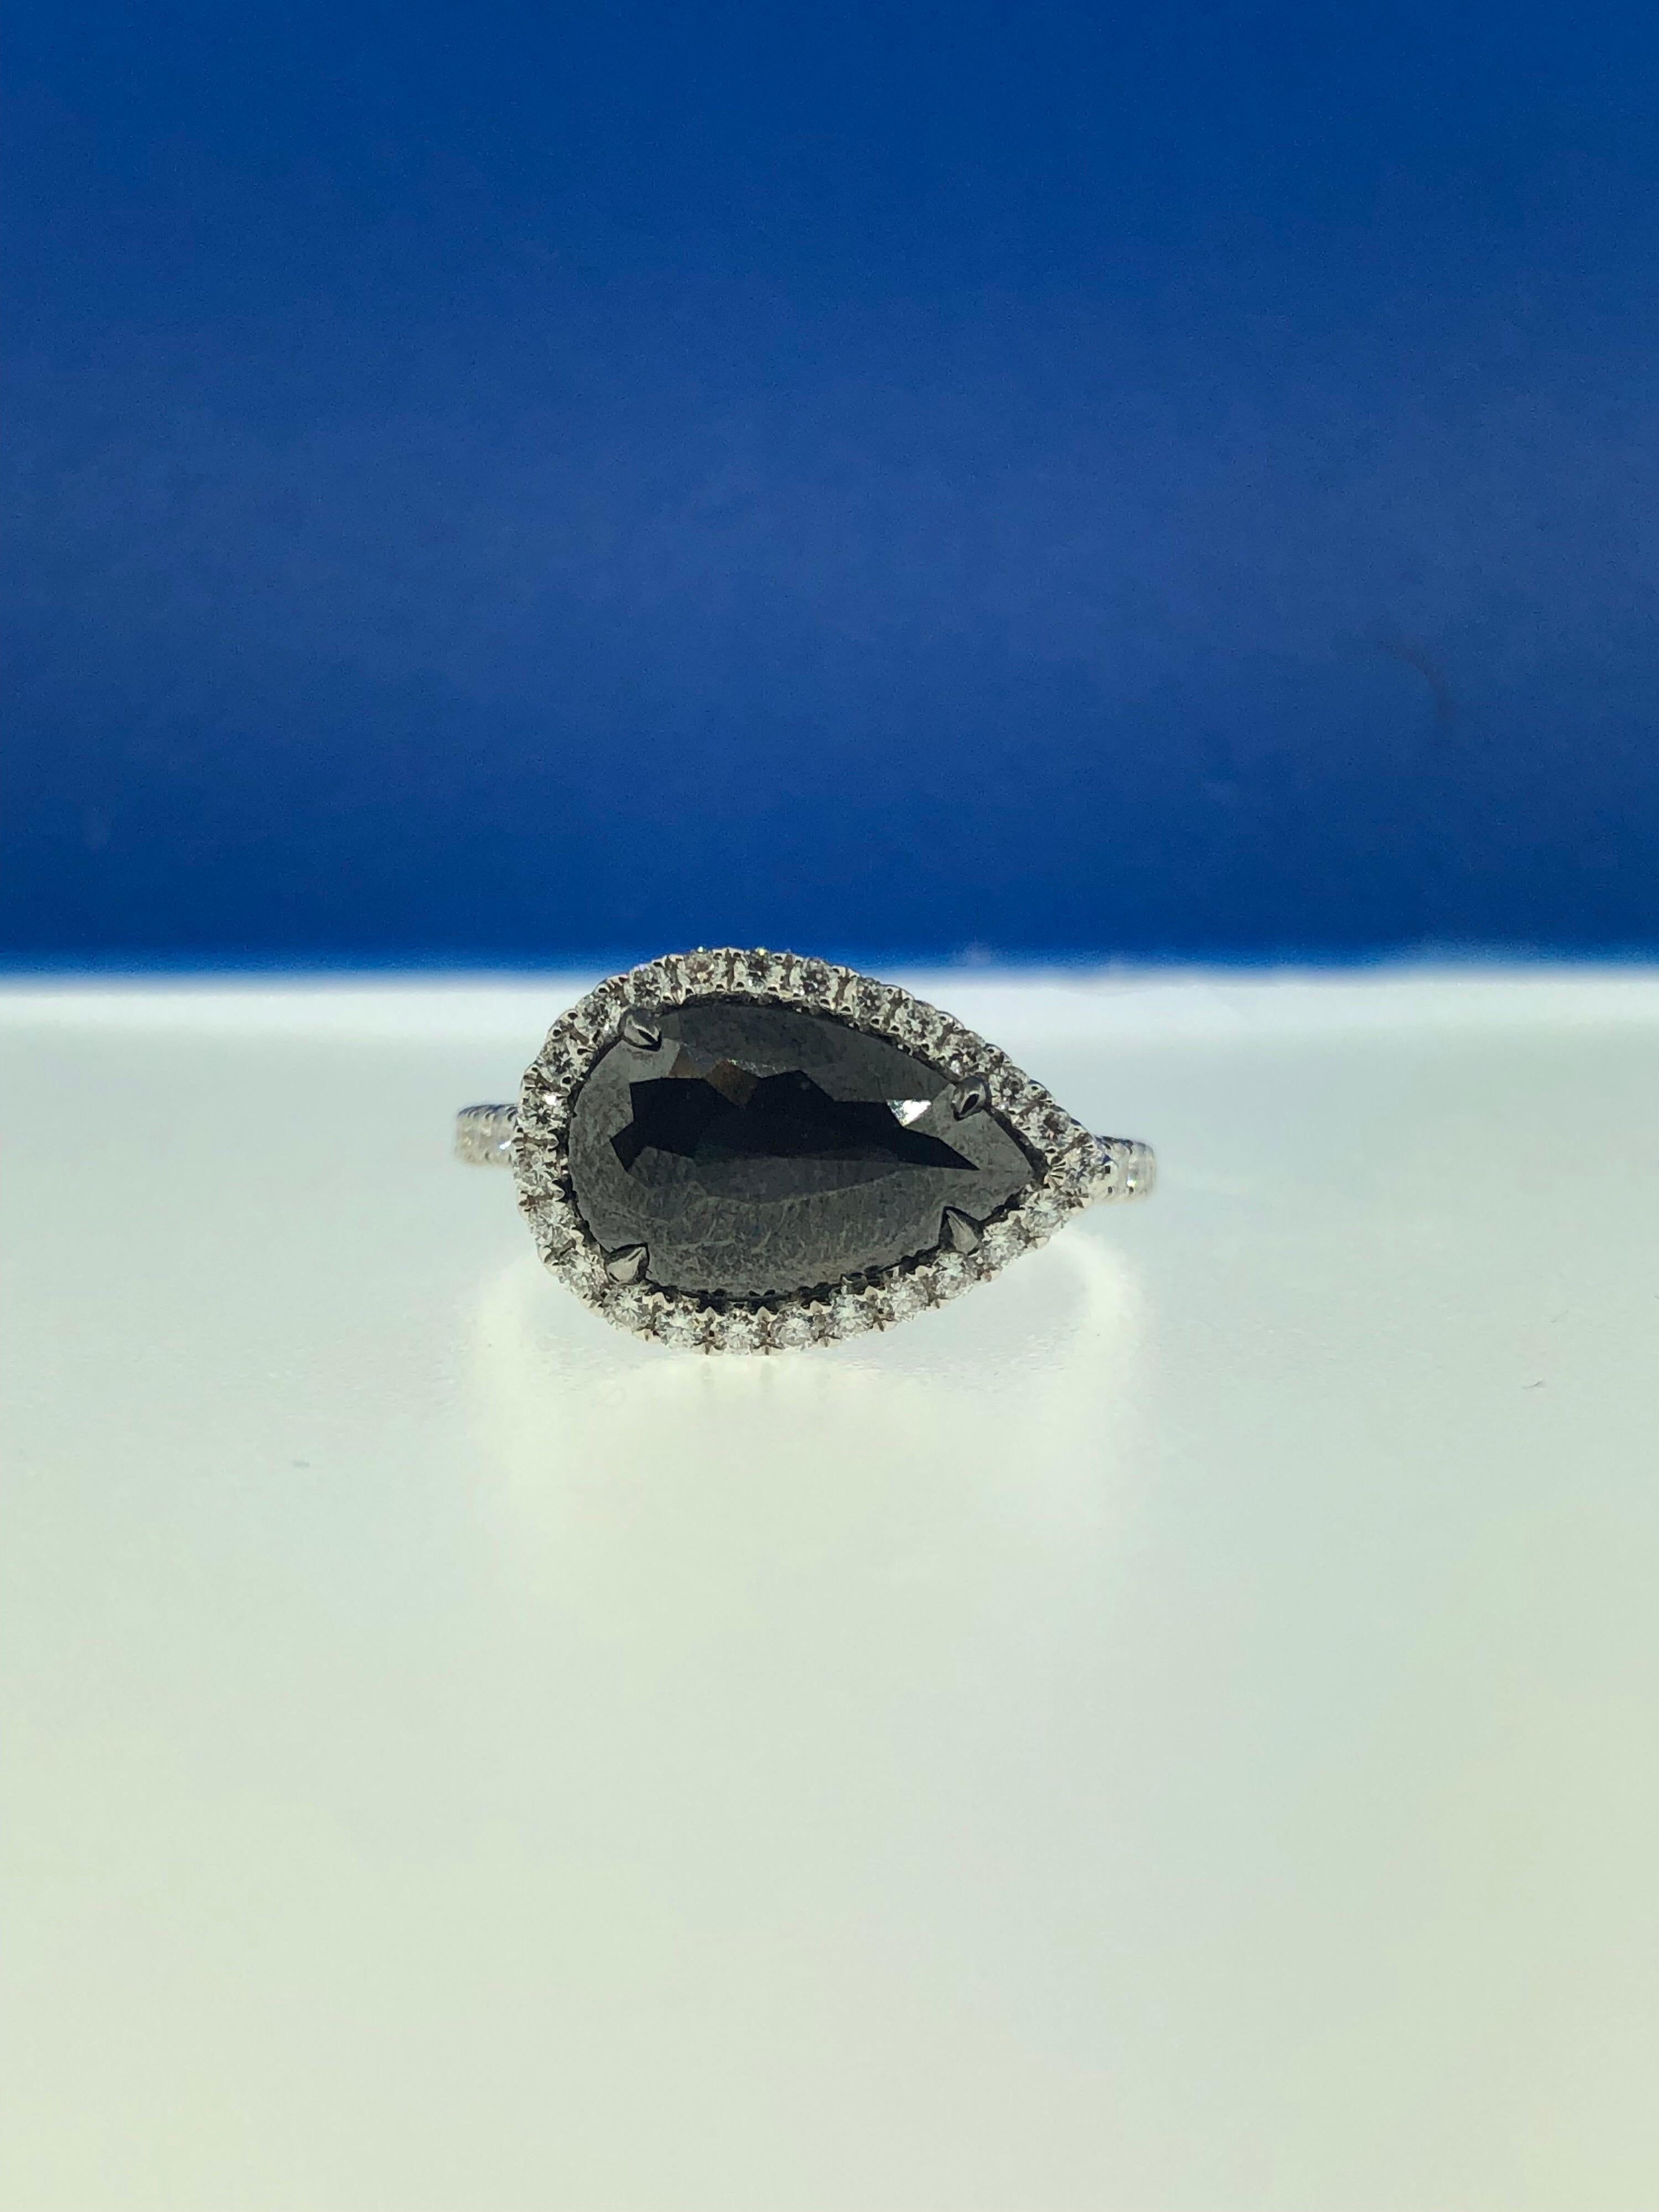 This stunning ring showcases a beautiful 2.34 carat rose cut pear shape black diamond with a white diamond halo set in 18 karat white gold. 
Total diamond weight (not including center stone) = 0.44 carats. Ring size is 6 1/2.
